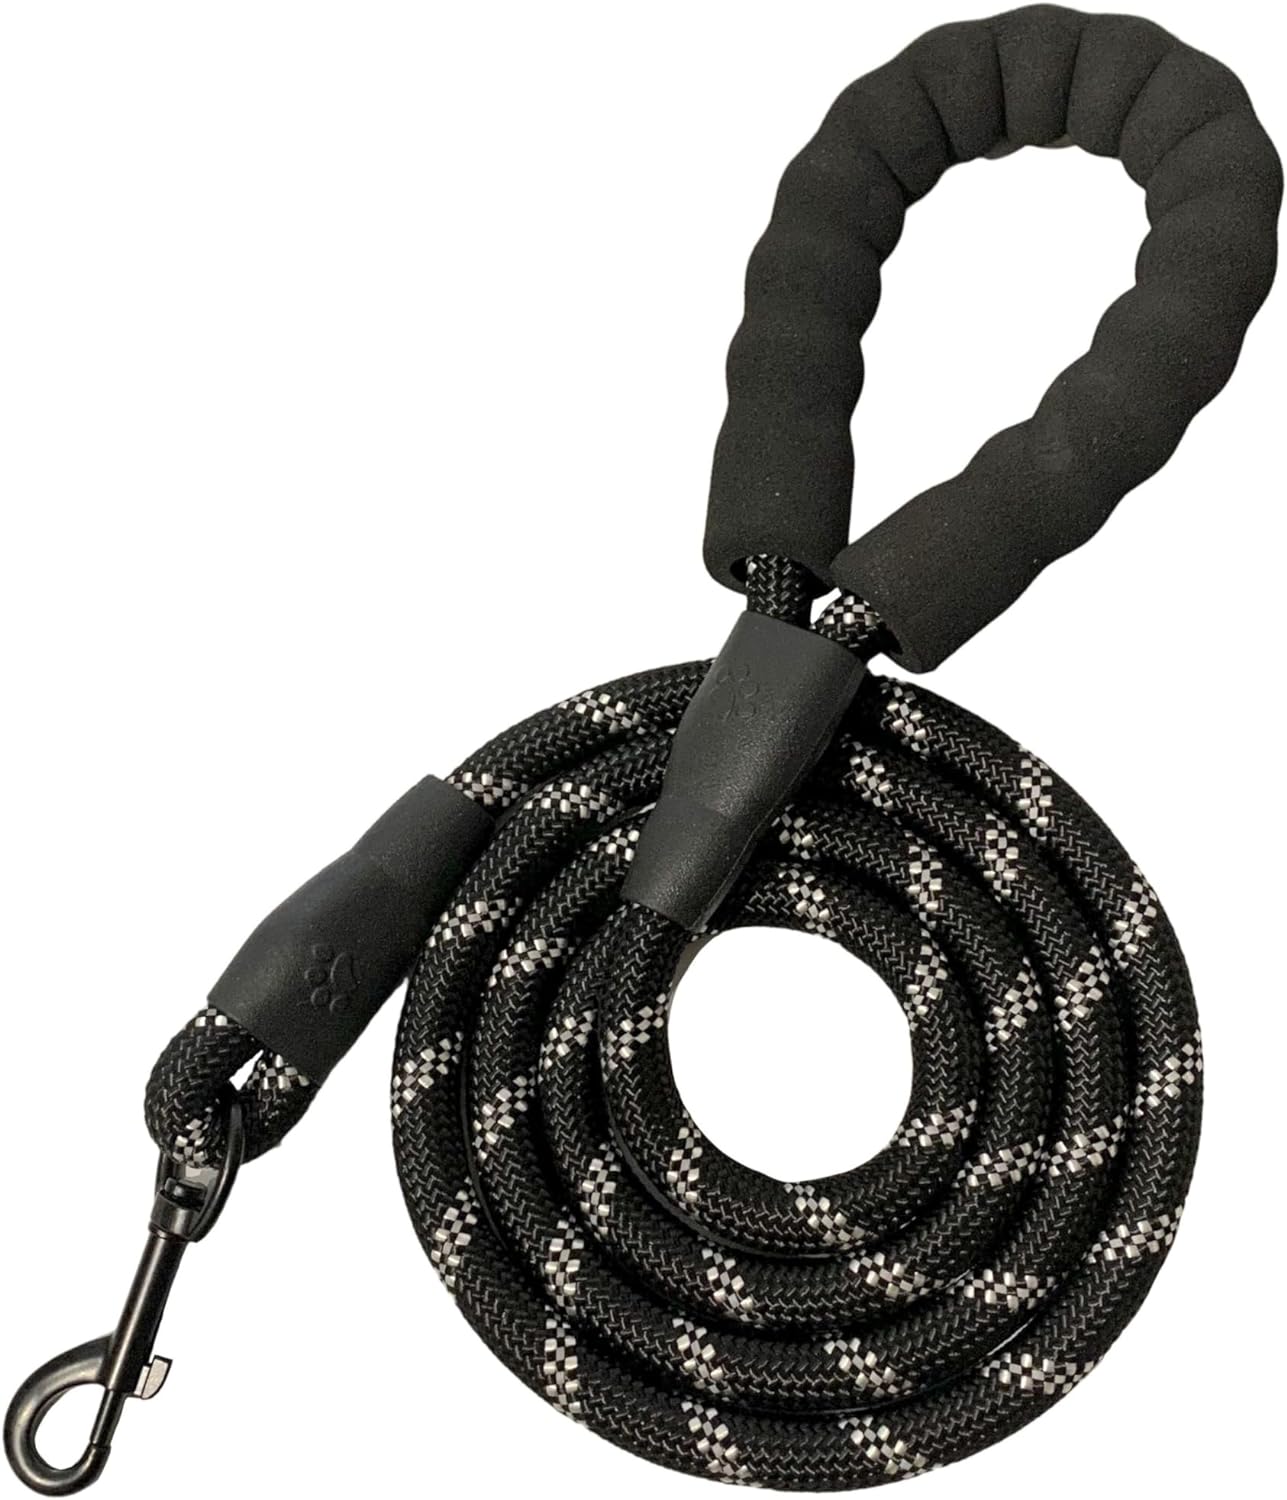 5-Foot Black Rope Dog Leash - 1/2 Inch Thickness, Padded Comfort Handle, Reflective for Safety, Perfect for Breeds up to 80lbs